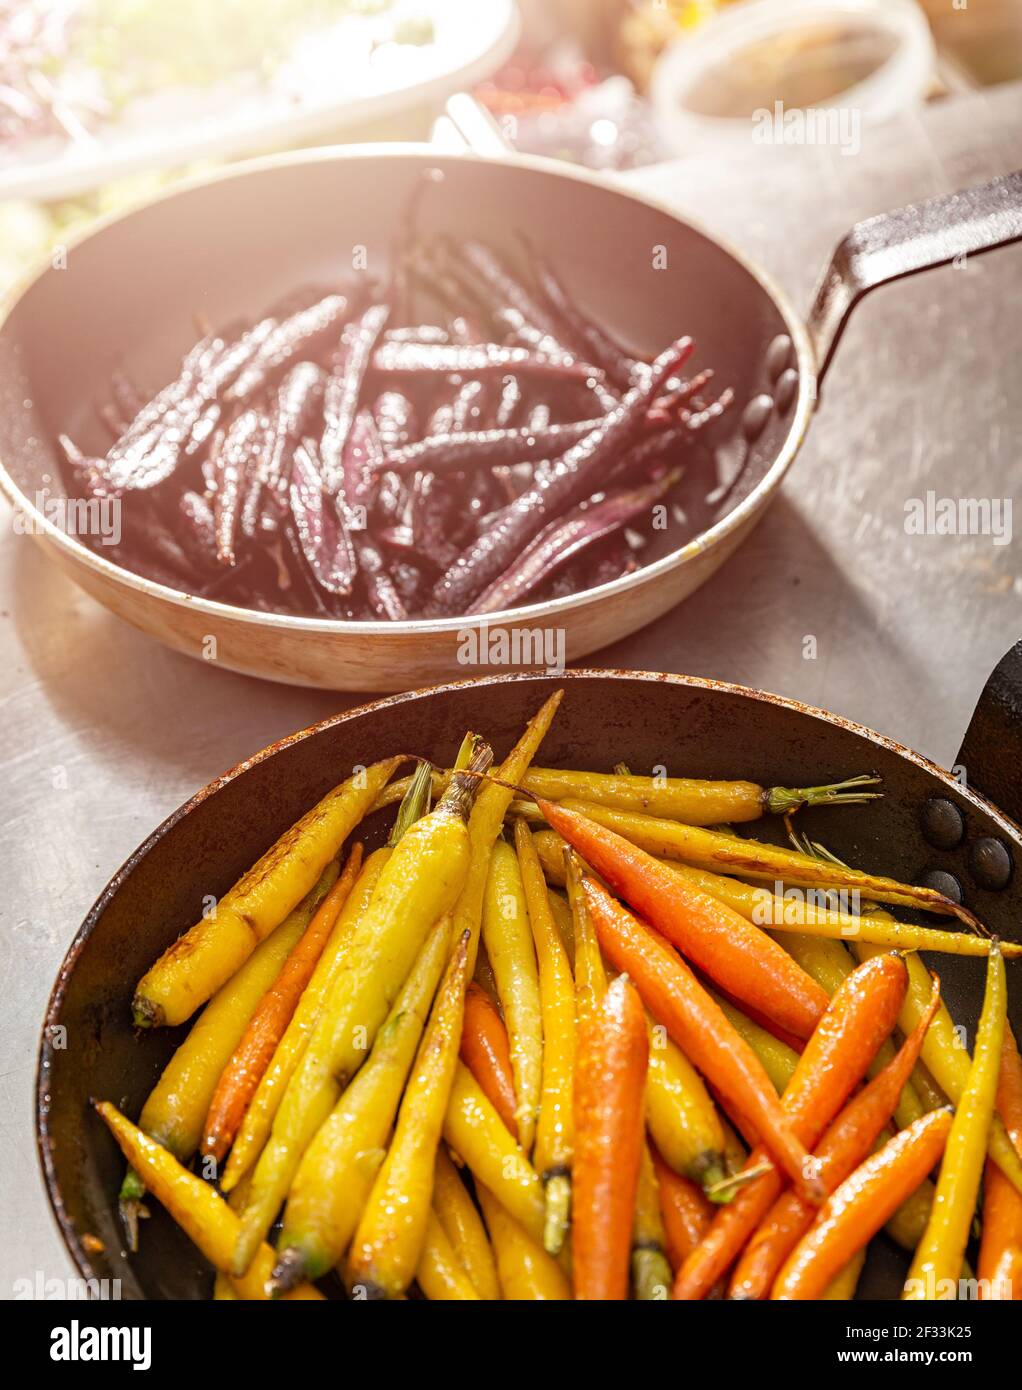 Baby carrots grilled Stock Photo